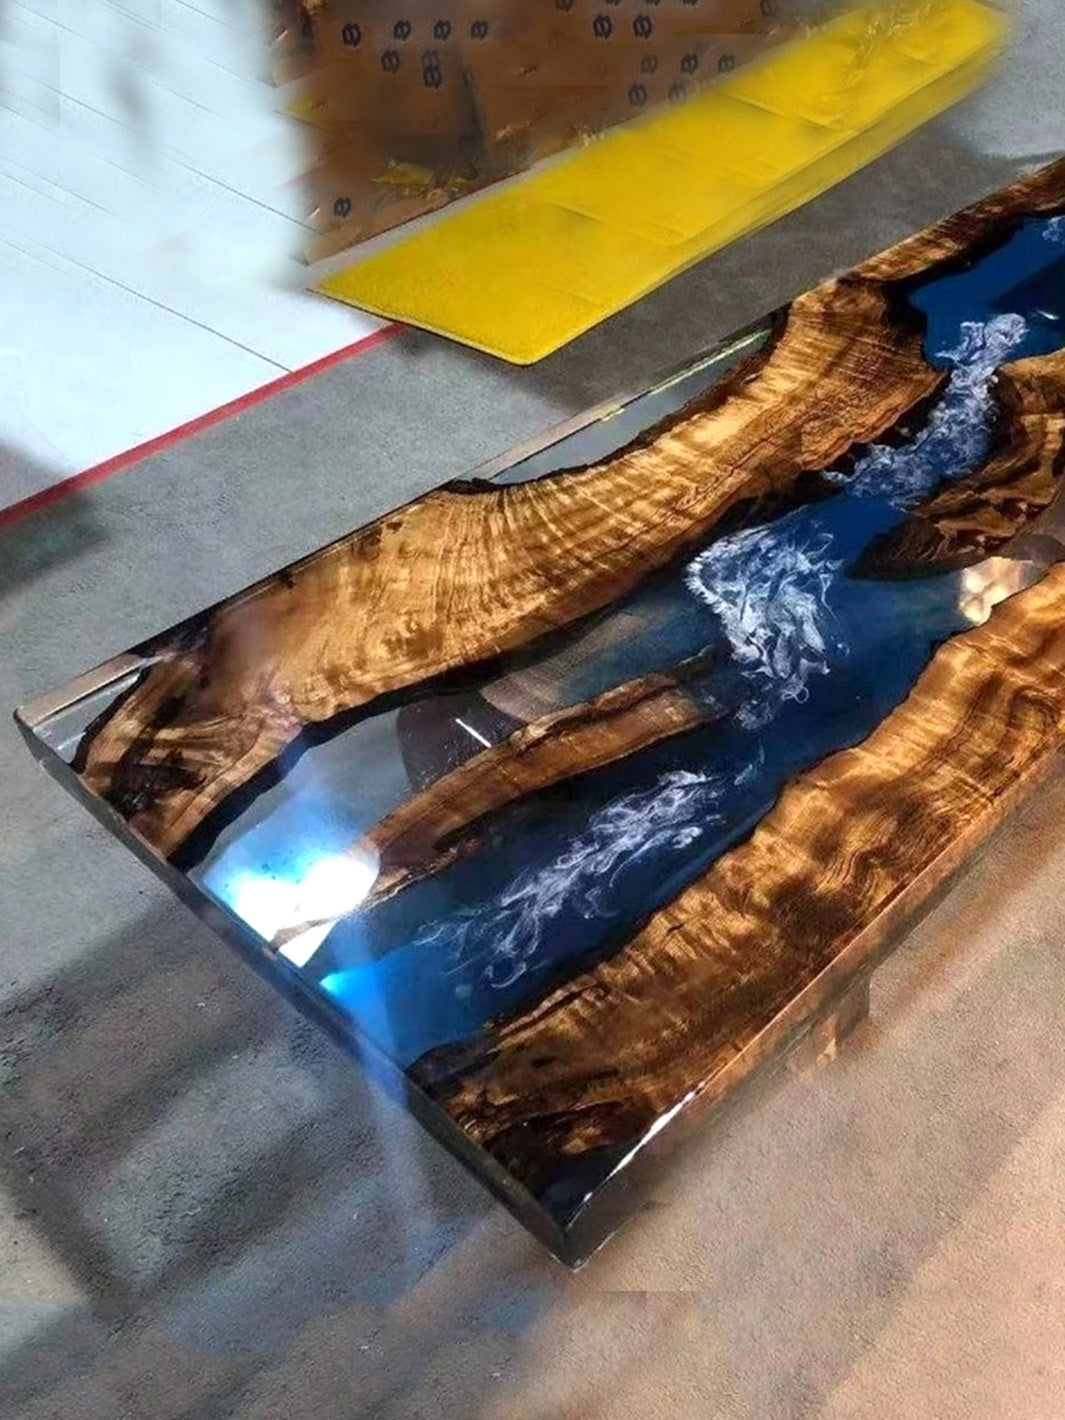 Handcrafted River Beach Epoxy Resin Wooden Coffee Table| 150x60cm Made 4 Decor Tables MDR0015-7